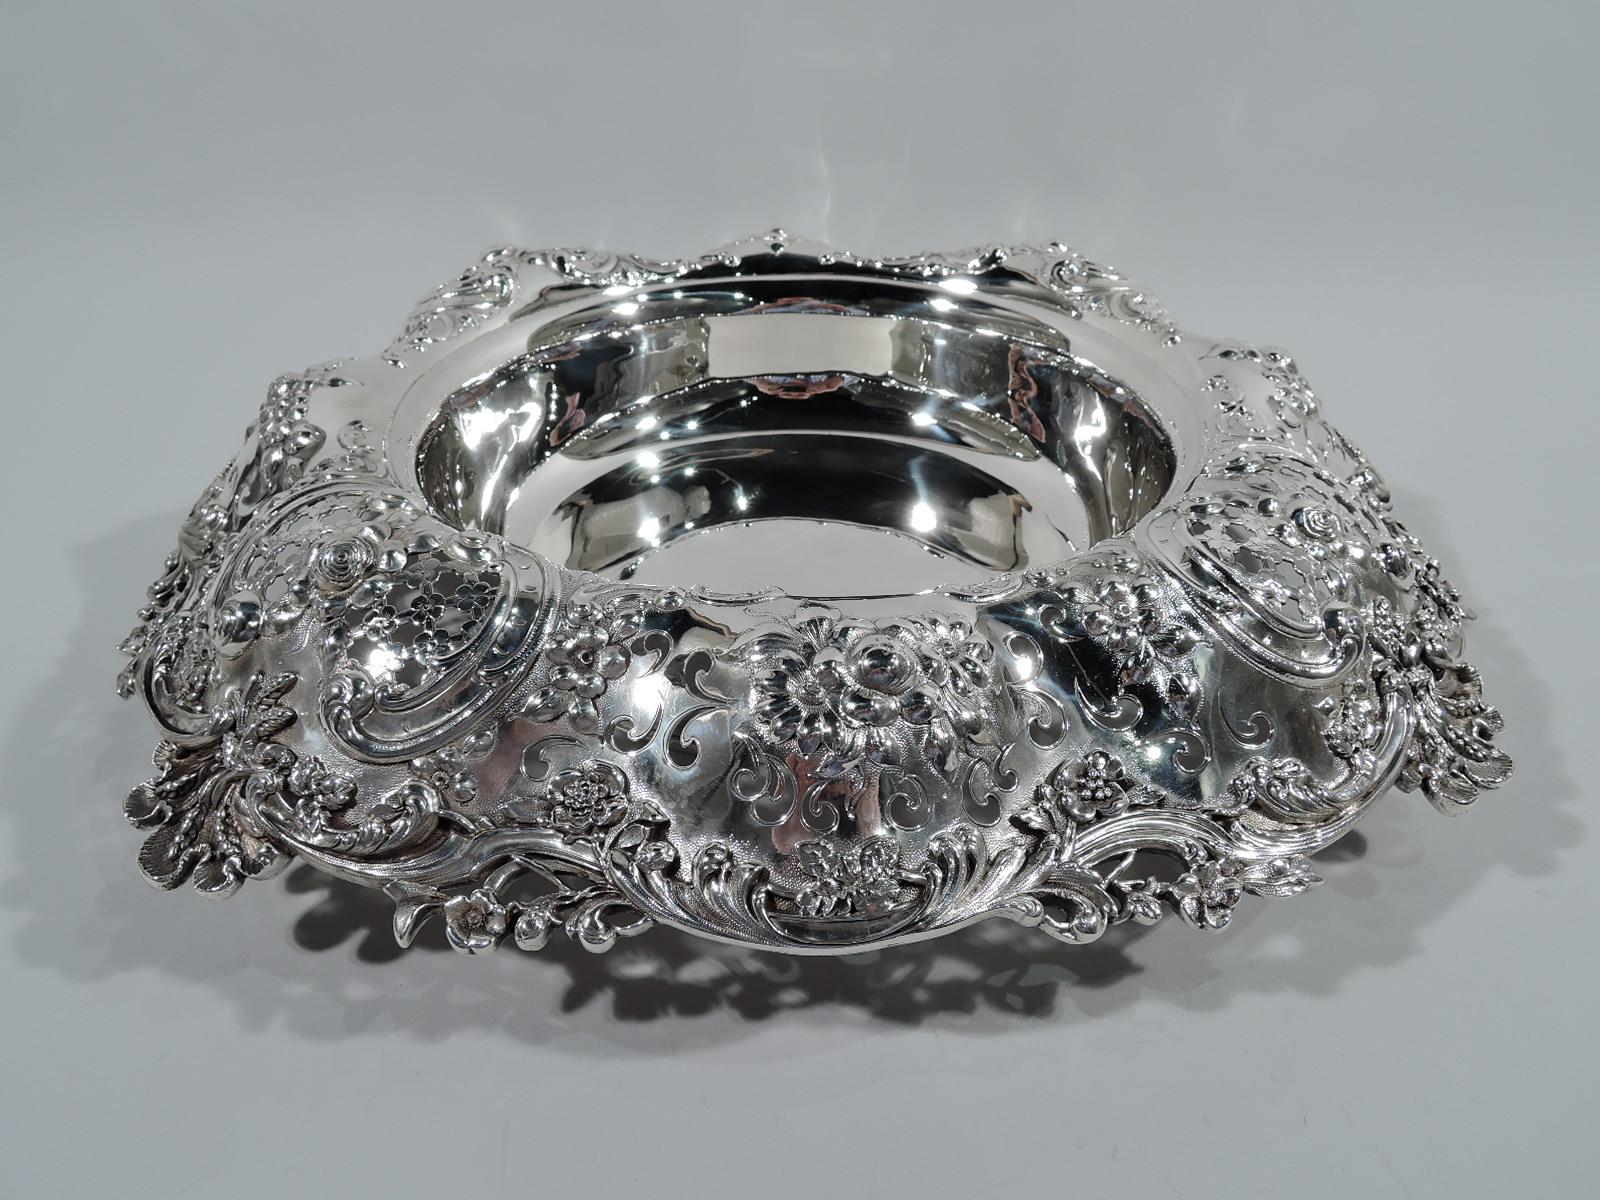 Gilded age sterling silver centerpiece bowl. Made by Tiffany & Co. in New York. Plain and round well. Turned-down and wavy rim embellished with scrolls, shells, flowers, and leaves. Ornament applied, pierced, and chased, and heightened with